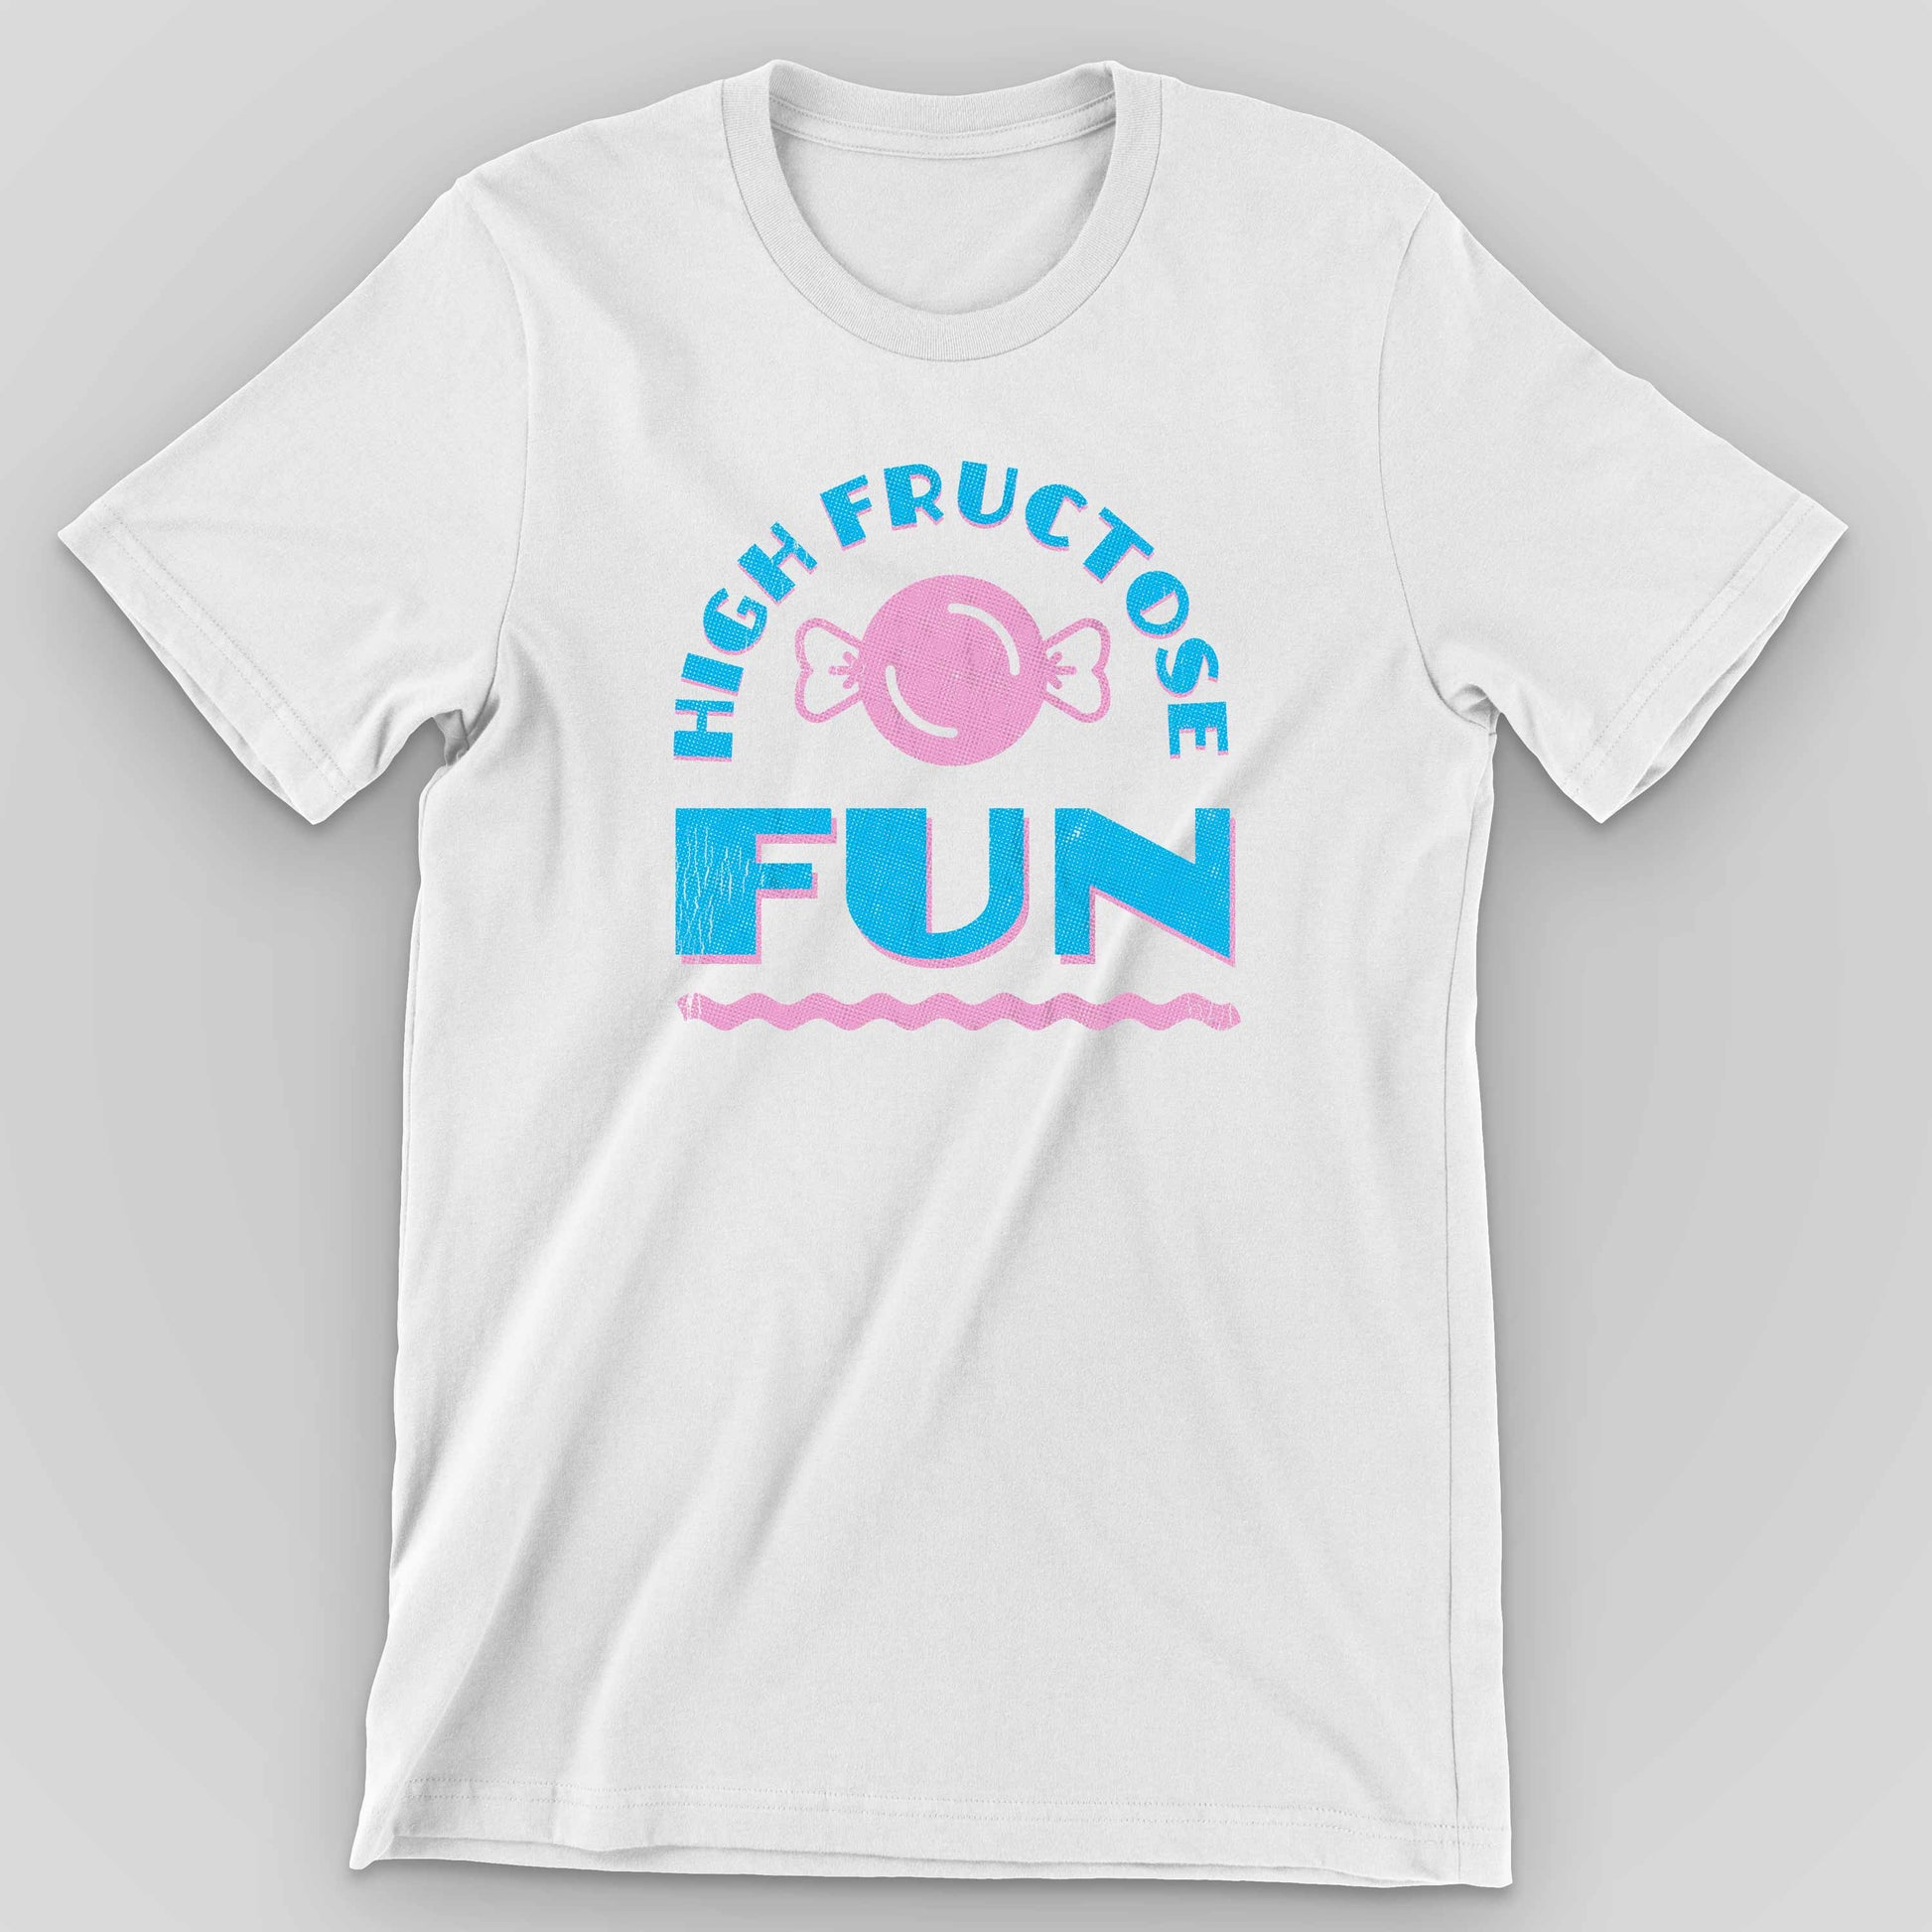 White High Fructose Fun Graphic T-Shirt by Snaxtime